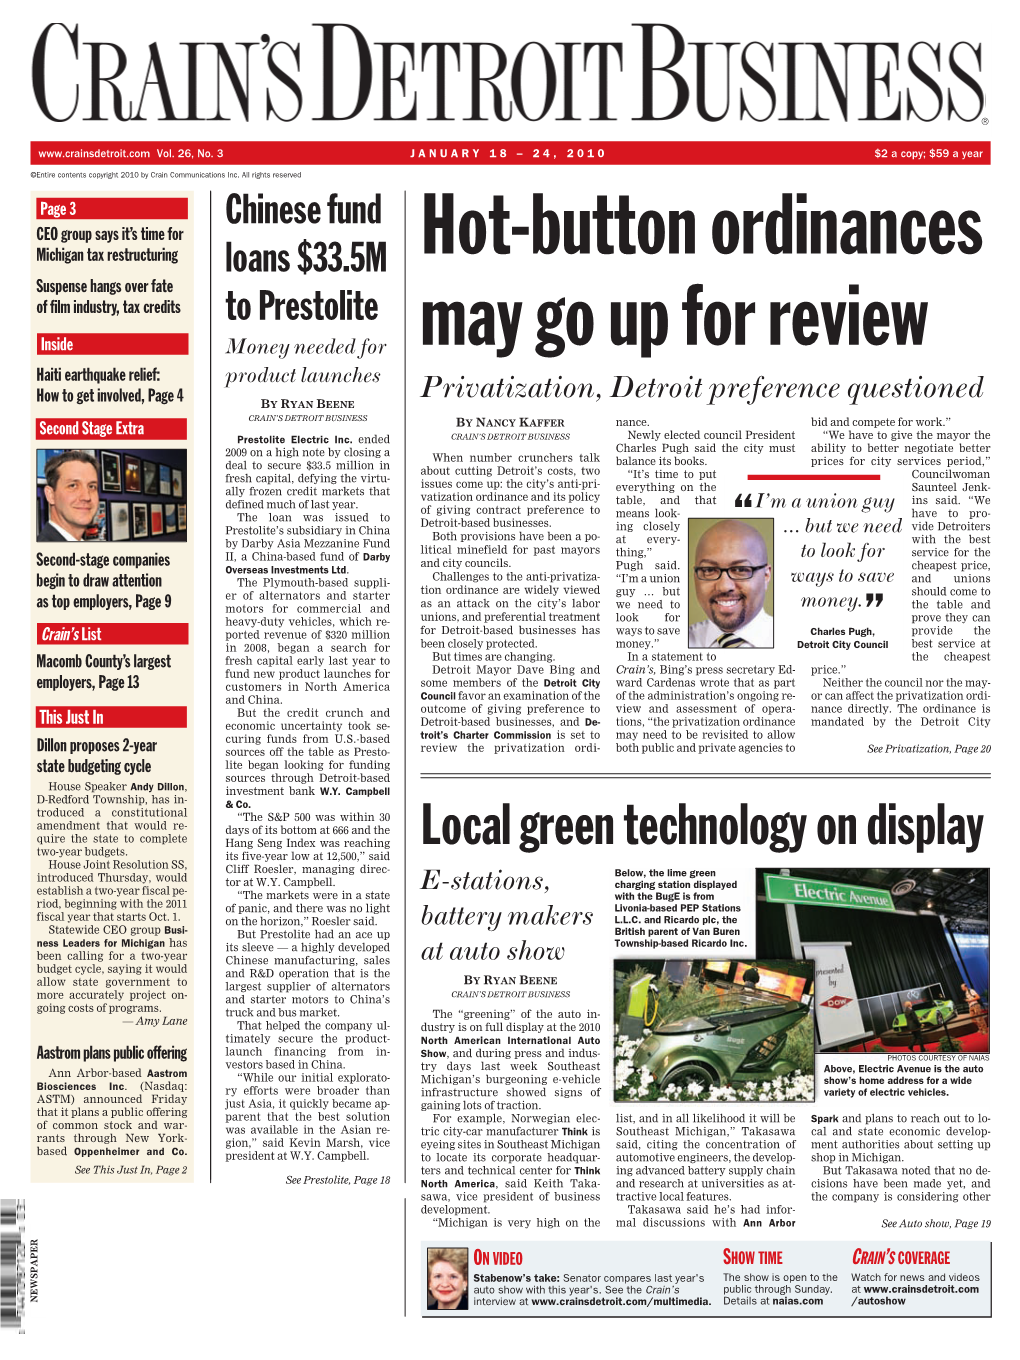 Hot-Button Ordinances May Go up for Review